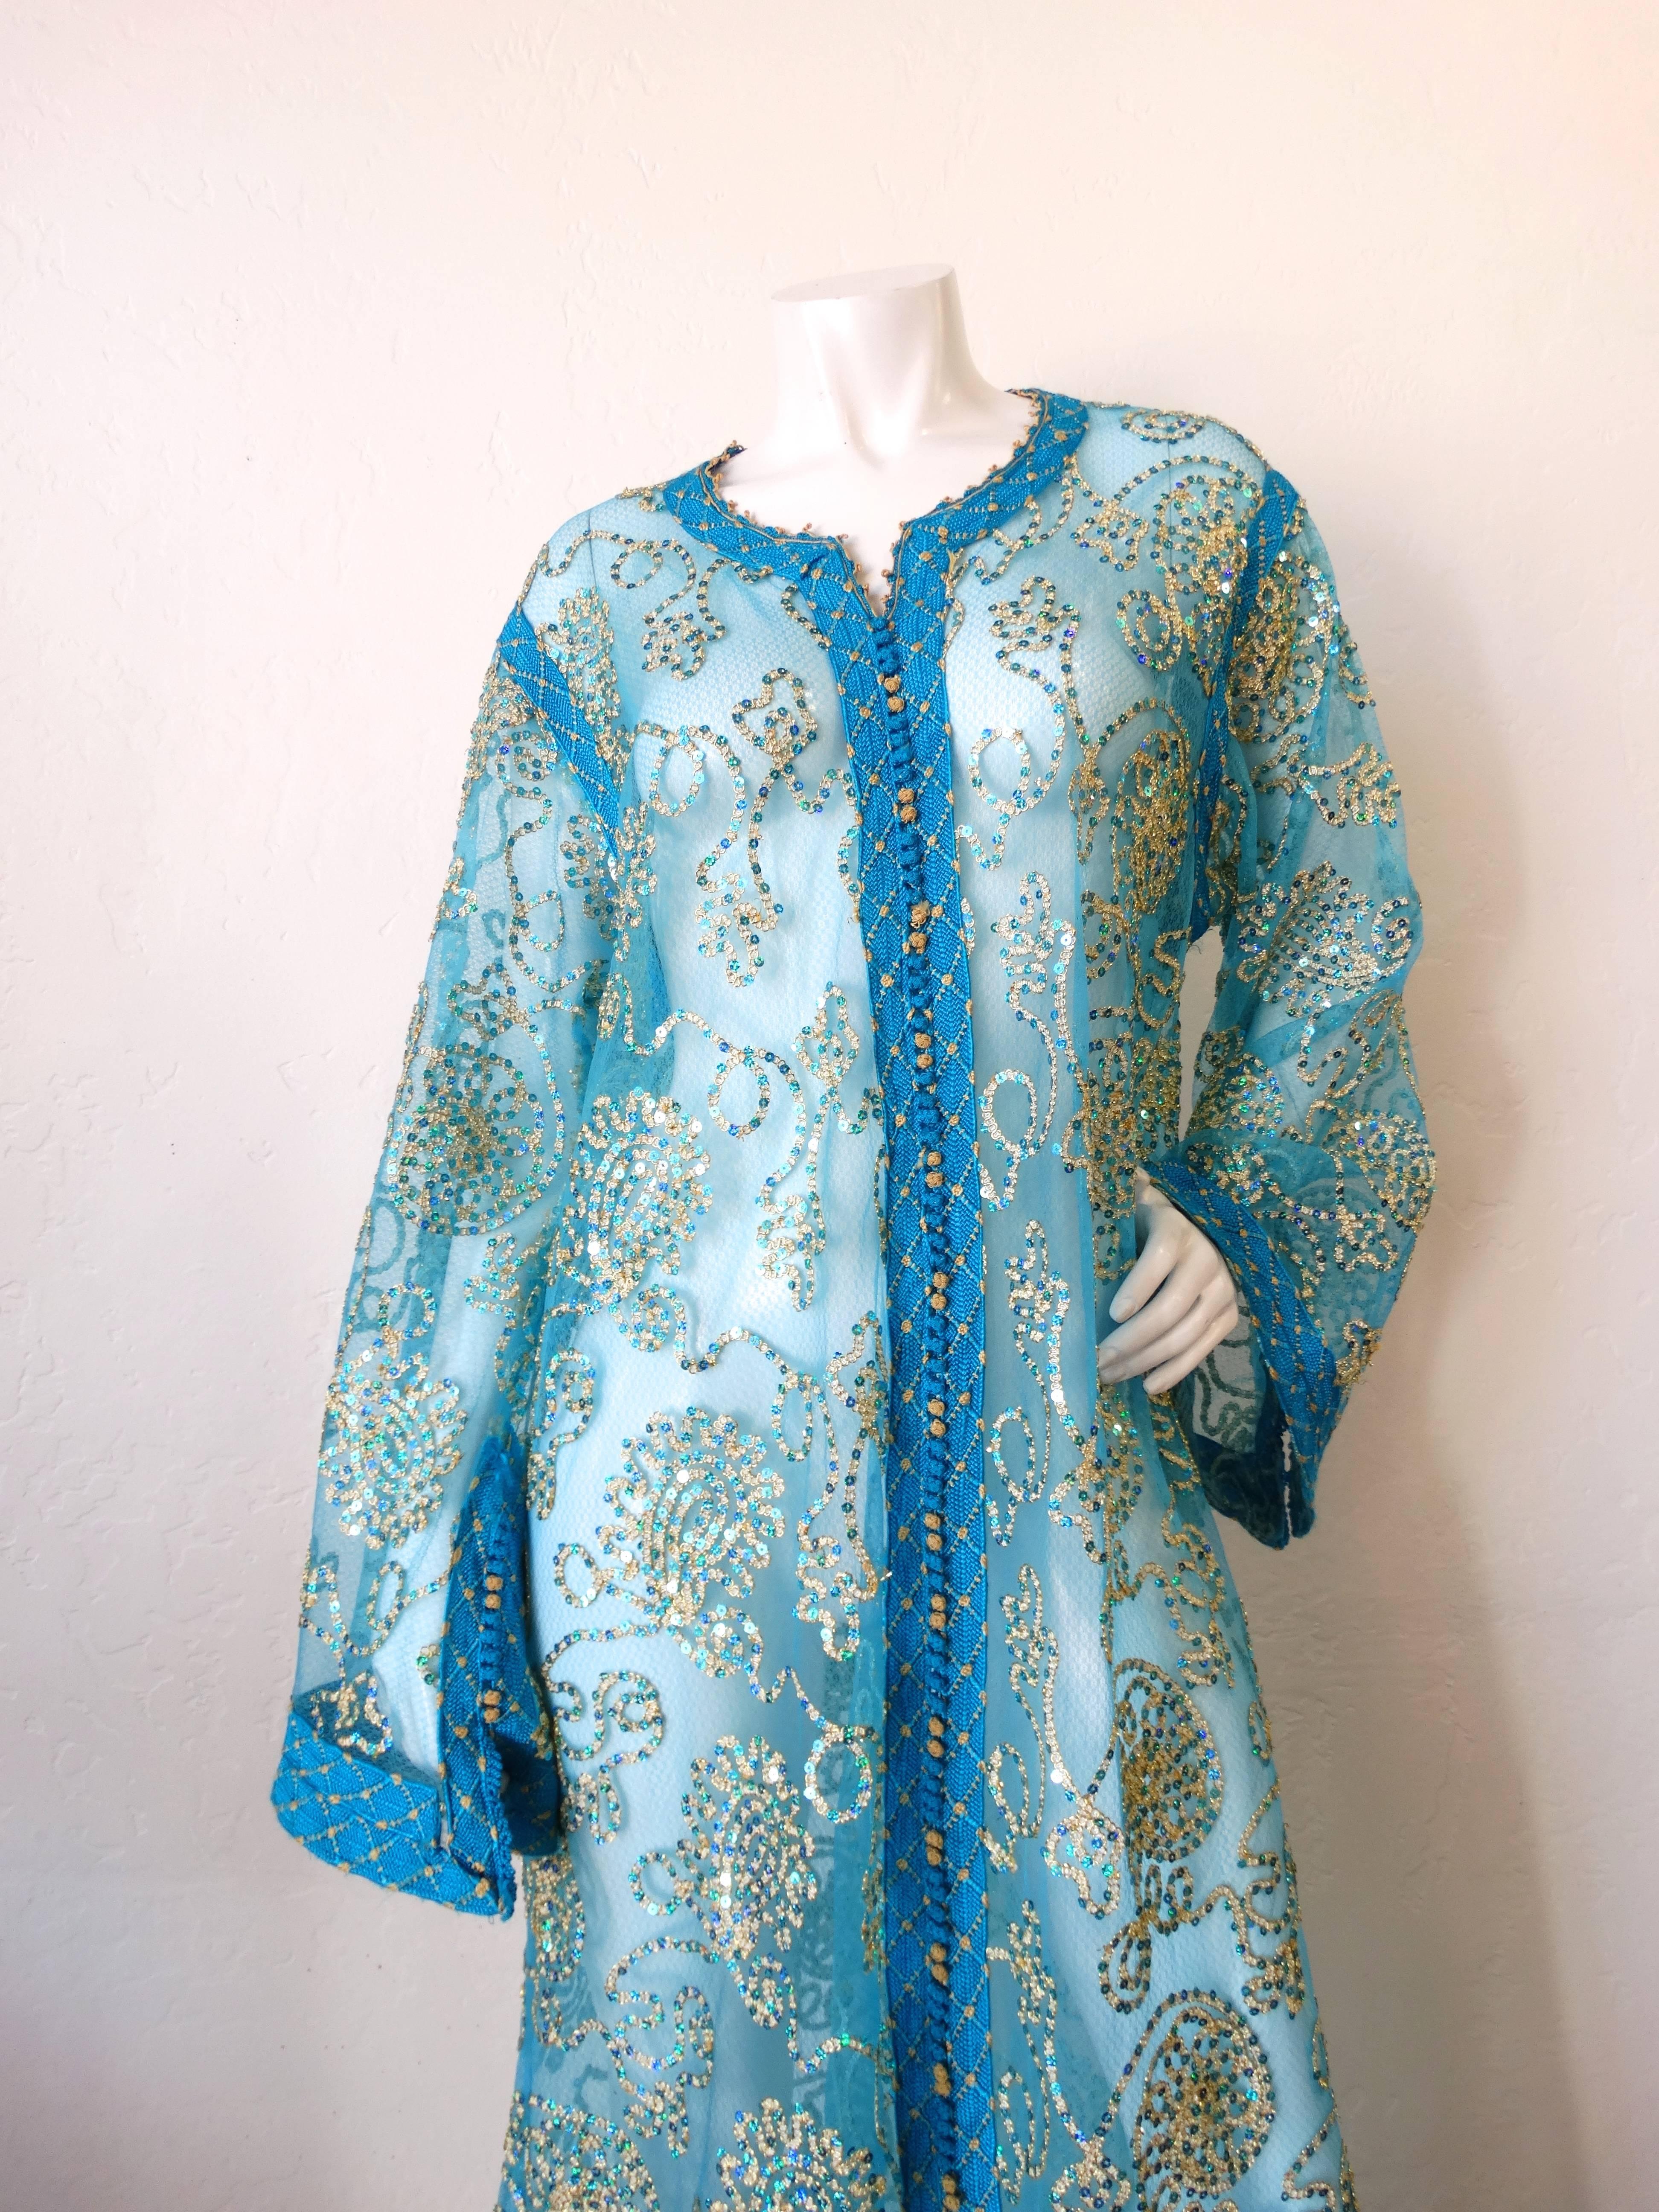 Up your kaftan game with our incredible 1970s sheer blue beauty! Constructed of a fine super sheer blue fabric and accented with individual swirling lines of gold and blue sequin trim. Trimmed at the bust, cuffs and hem with blue and gold woven